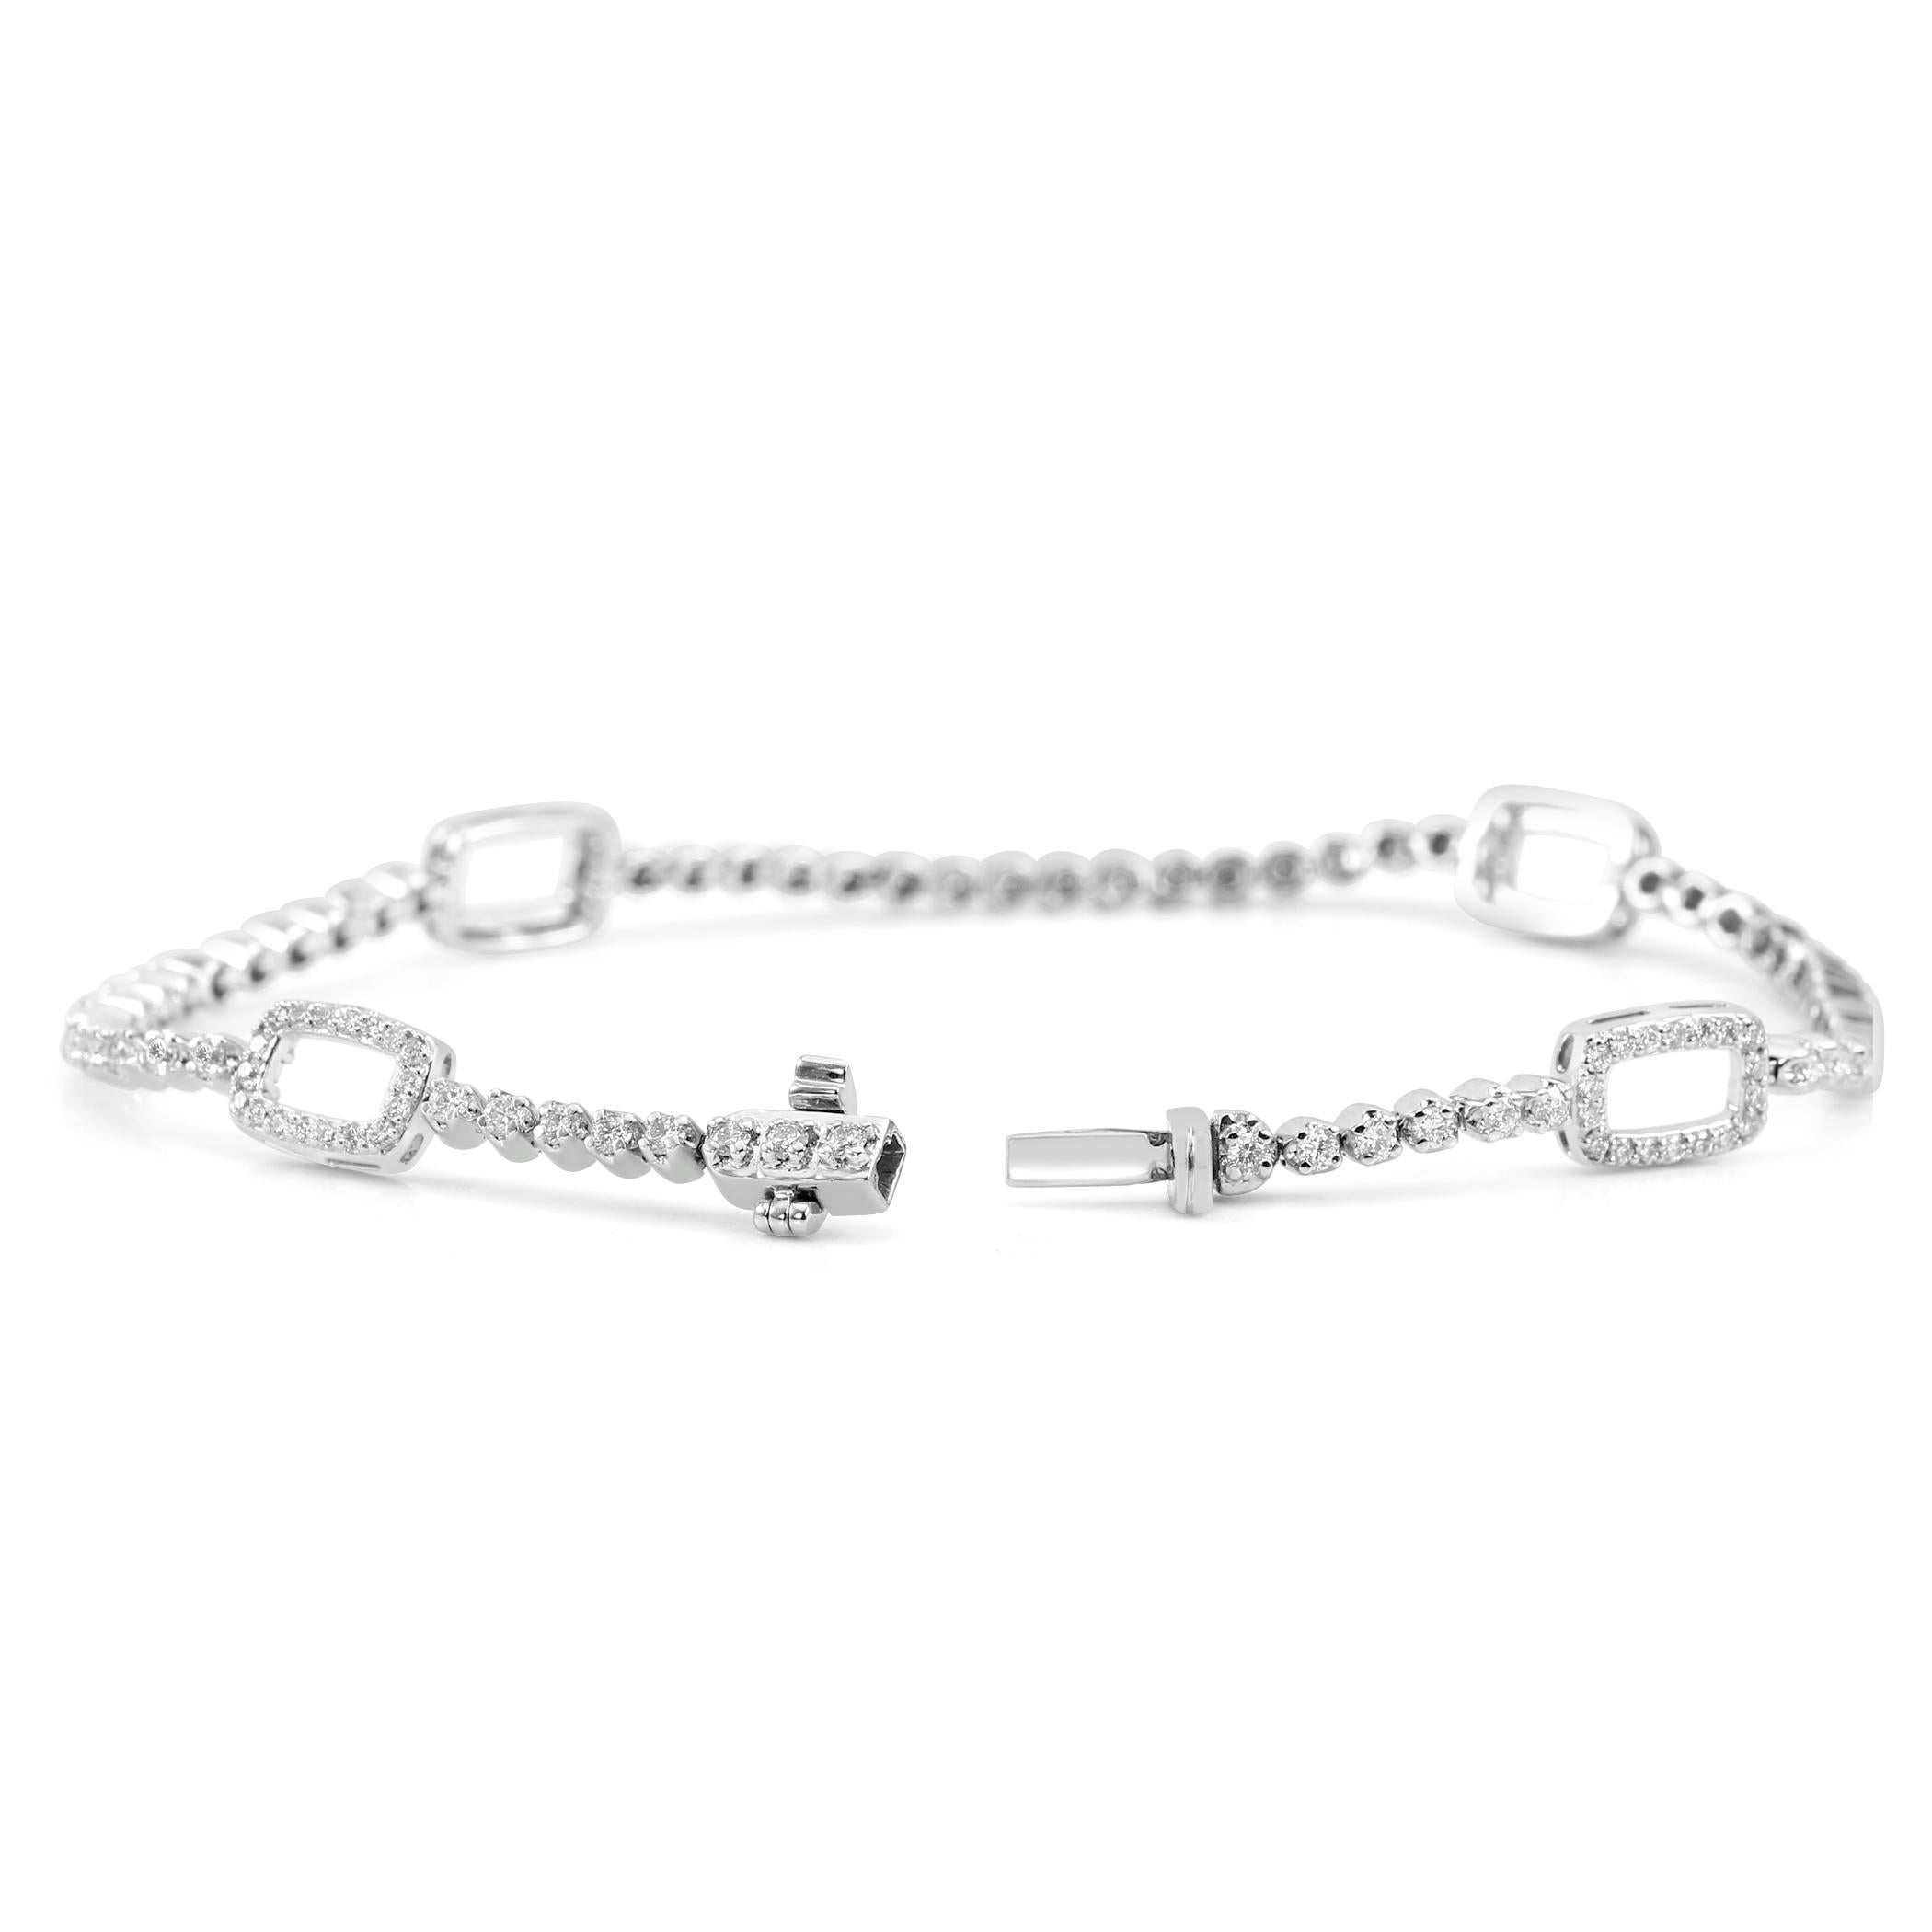 White Diamond Round 1.5 Carats 18K White Gold Fancy Fashion Tennis Bracelet  In New Condition For Sale In Sayreville, NJ